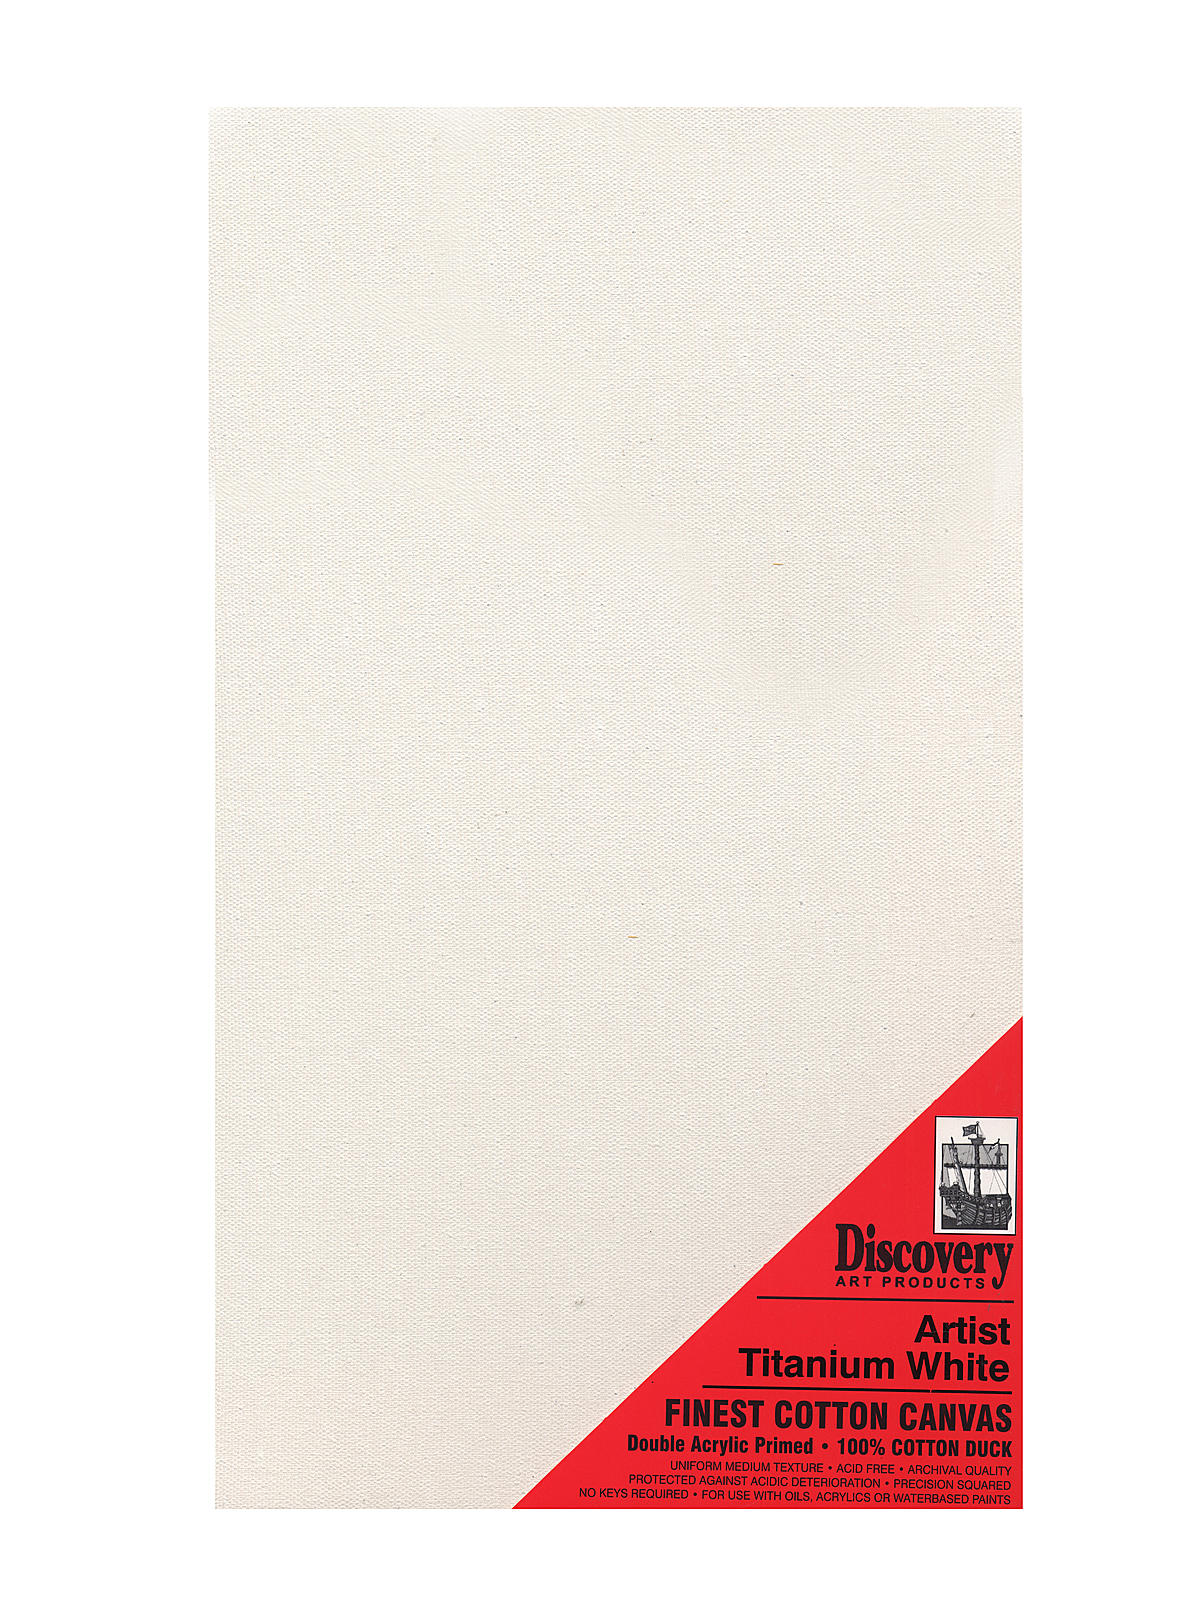 Finest Stretched Cotton Canvas White 18 In. X 36 In. Each